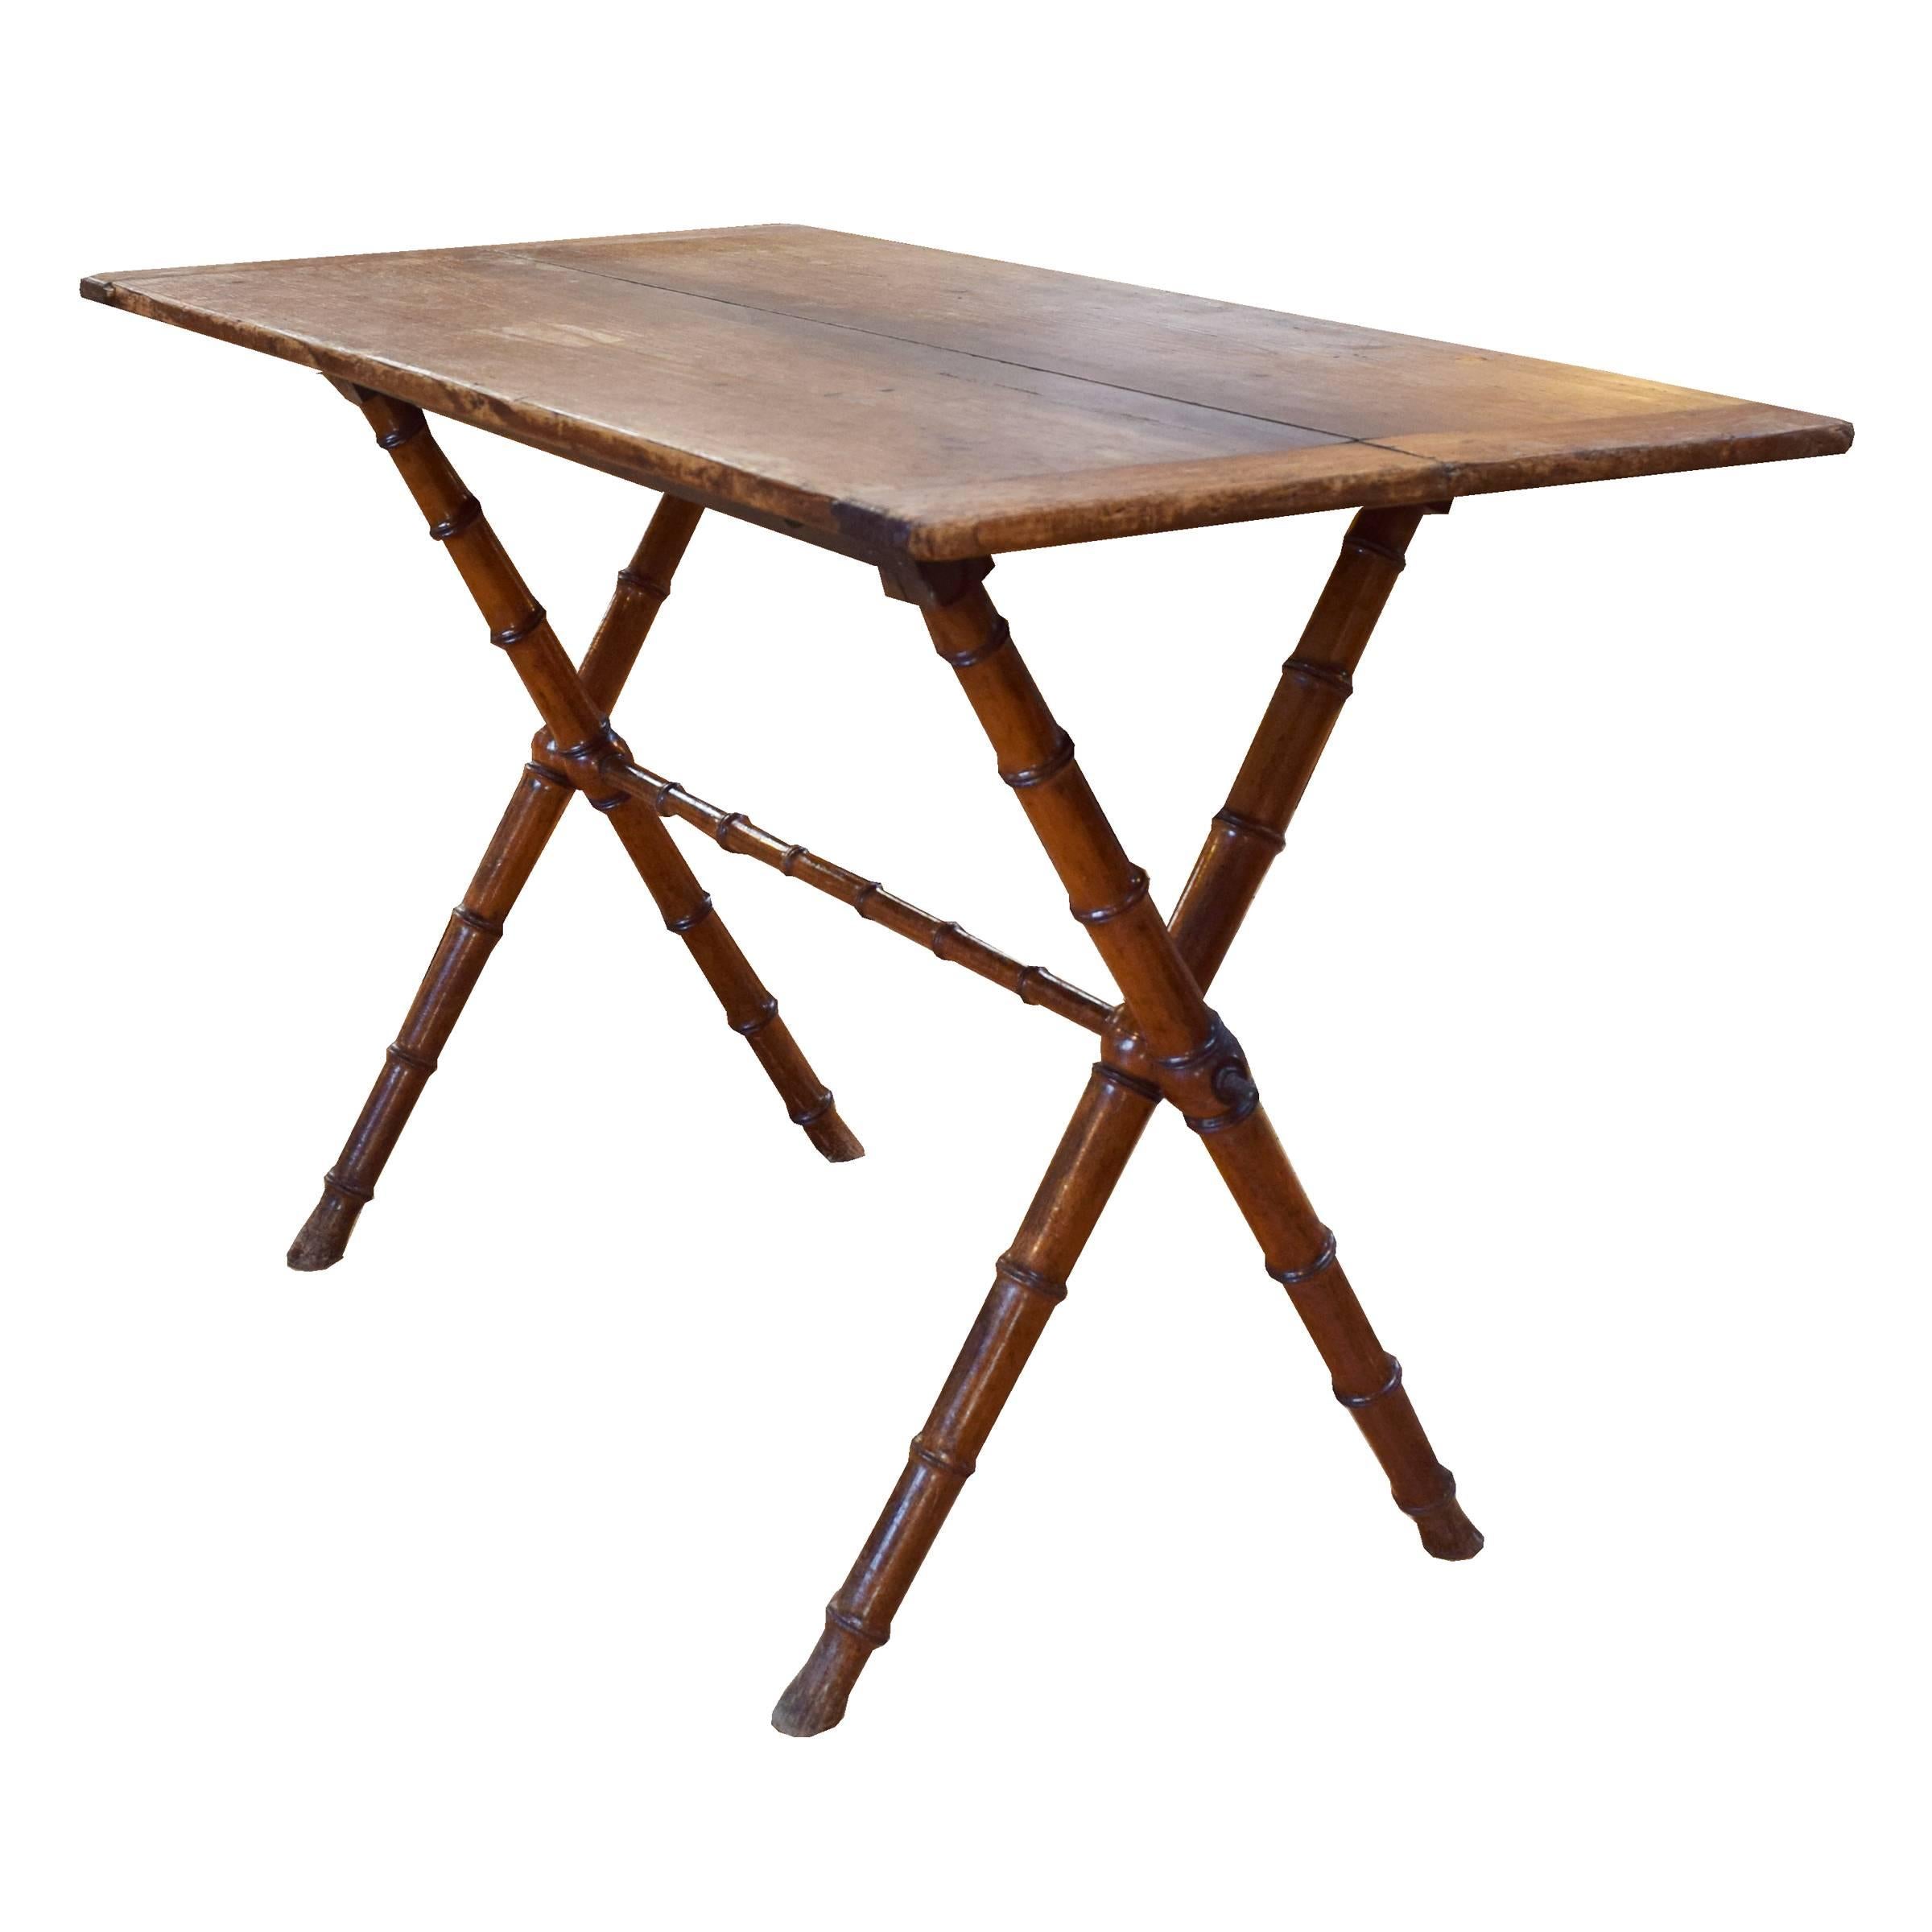 A lovely wood folding table with a pine top, four faux carved bamboo legs and stretcher, circa 1920.